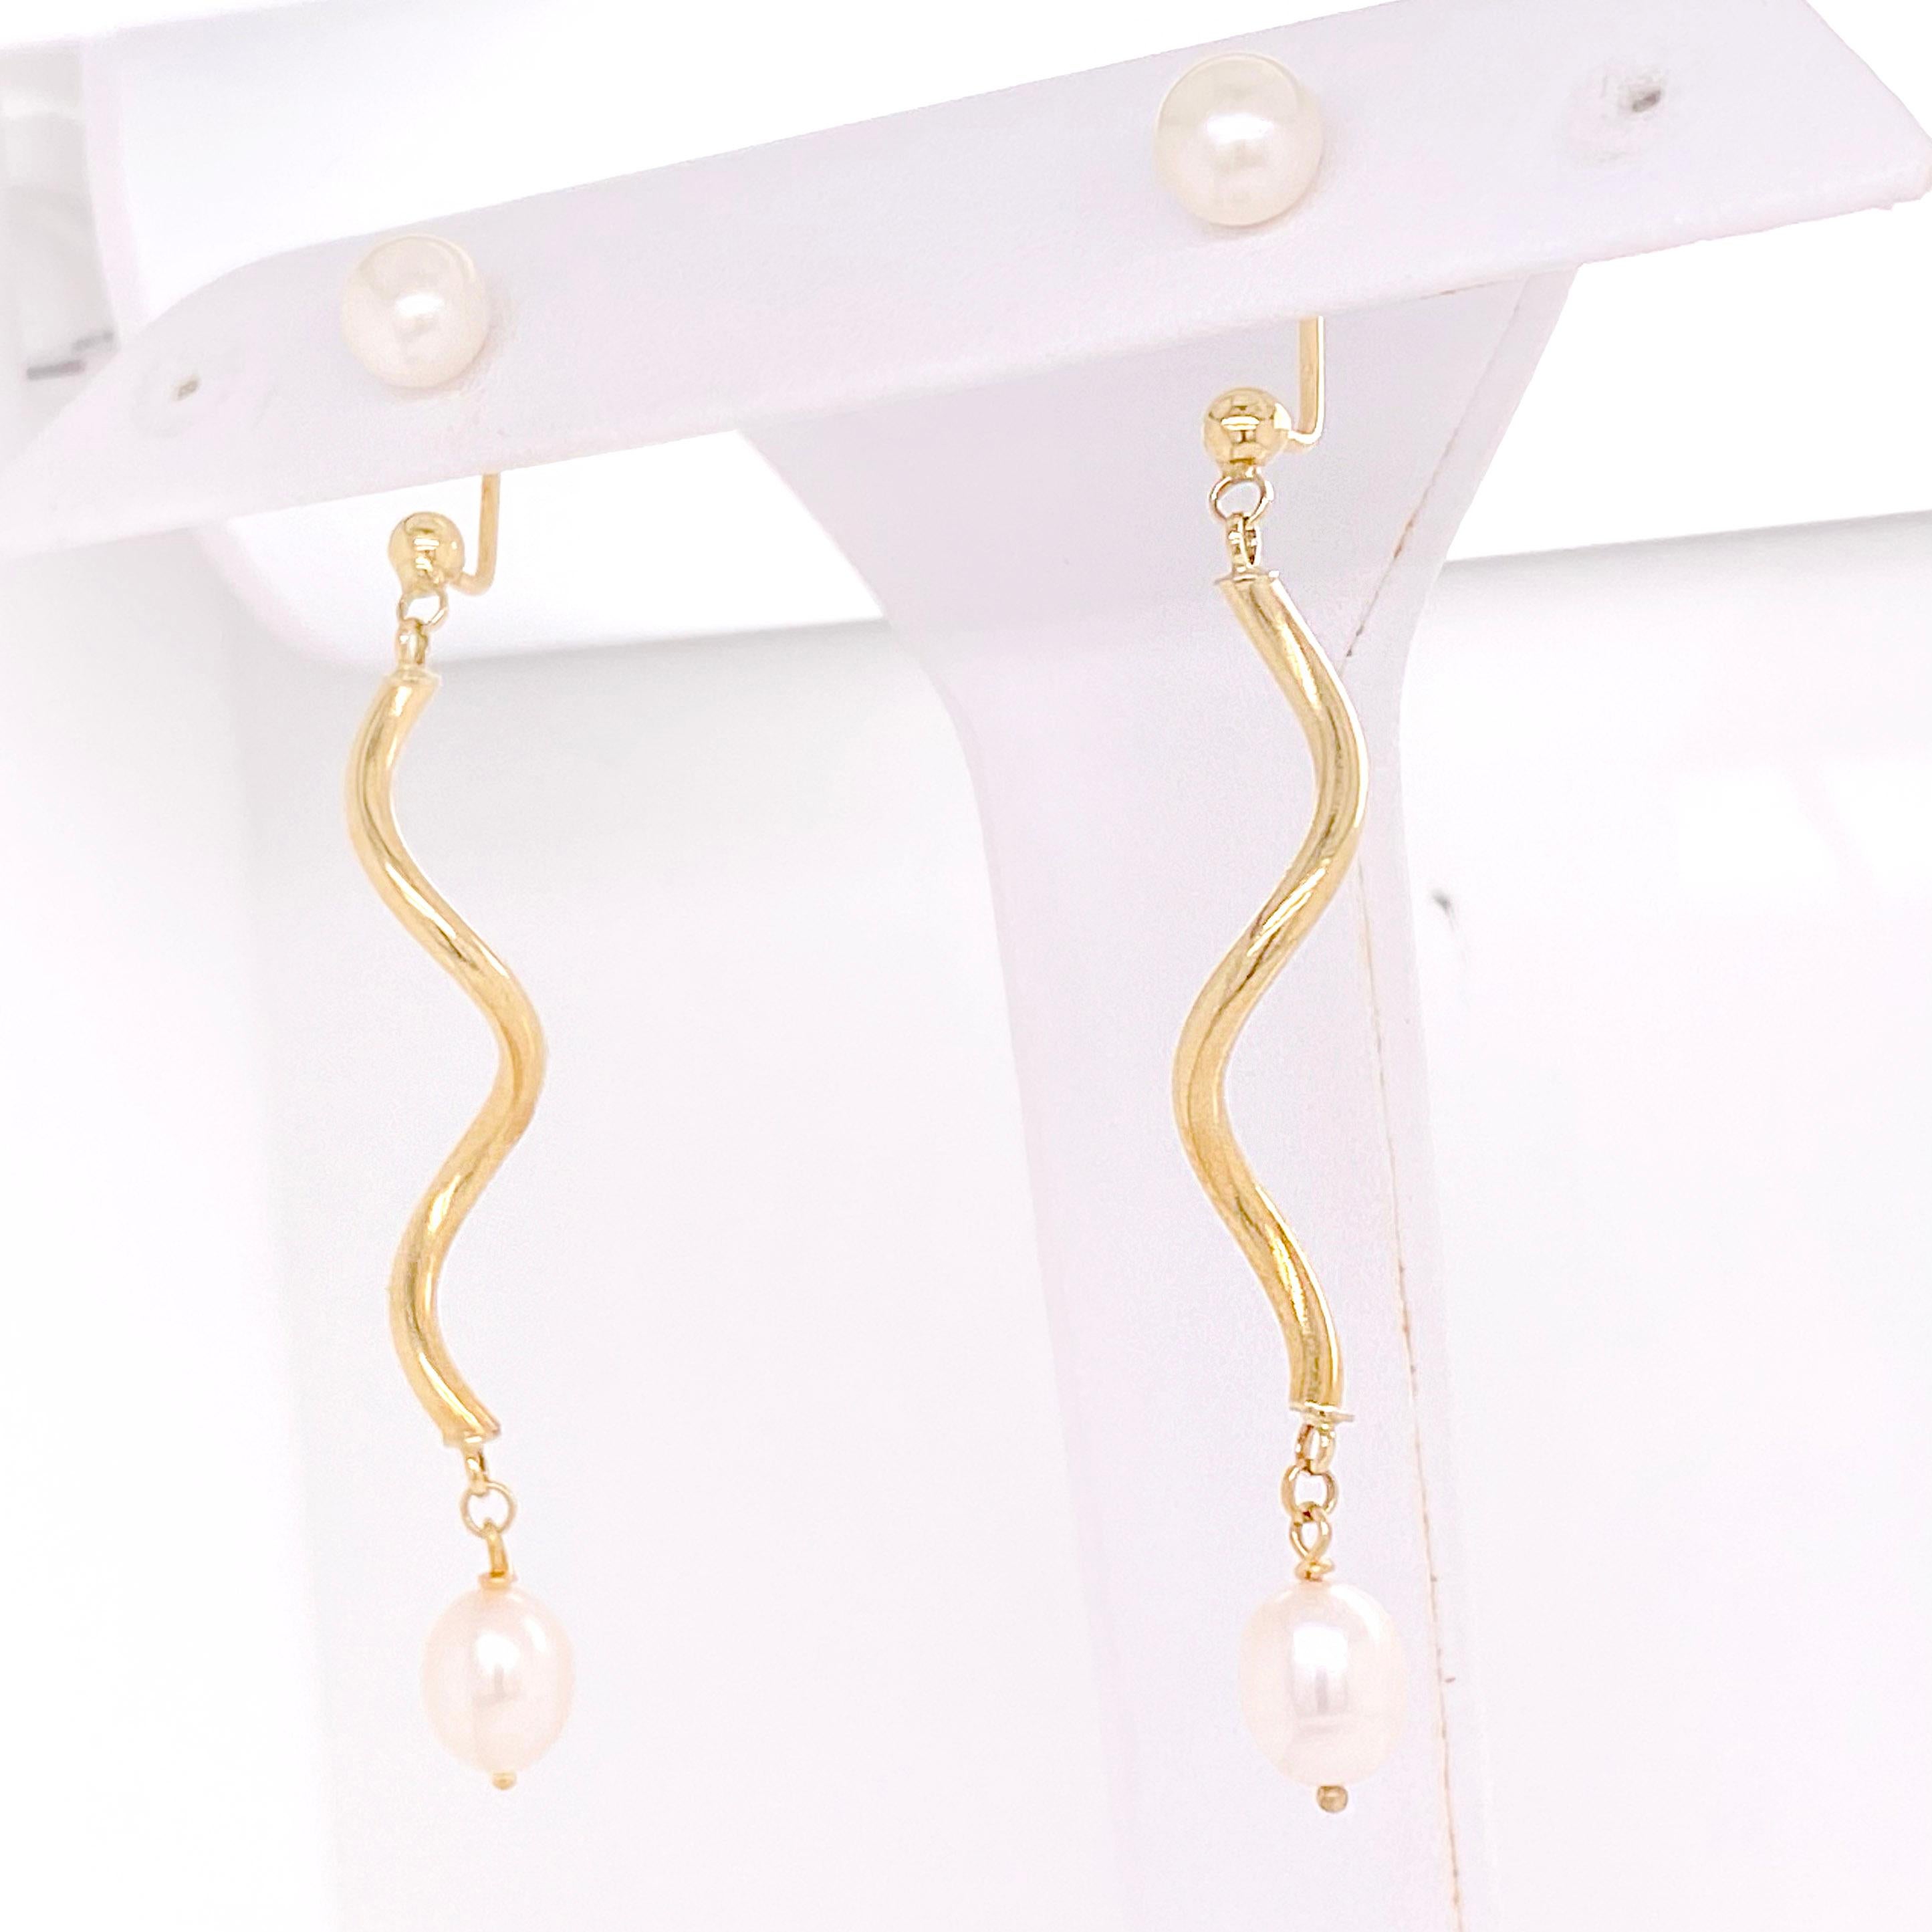 These long dangle earrings have a 7 millimeter pearl stud that has a swirly dangle of gold that is high-polished. There is a lovely white pearl at the bottom that swings from the gold. These The details for these gorgeous earrings are listed